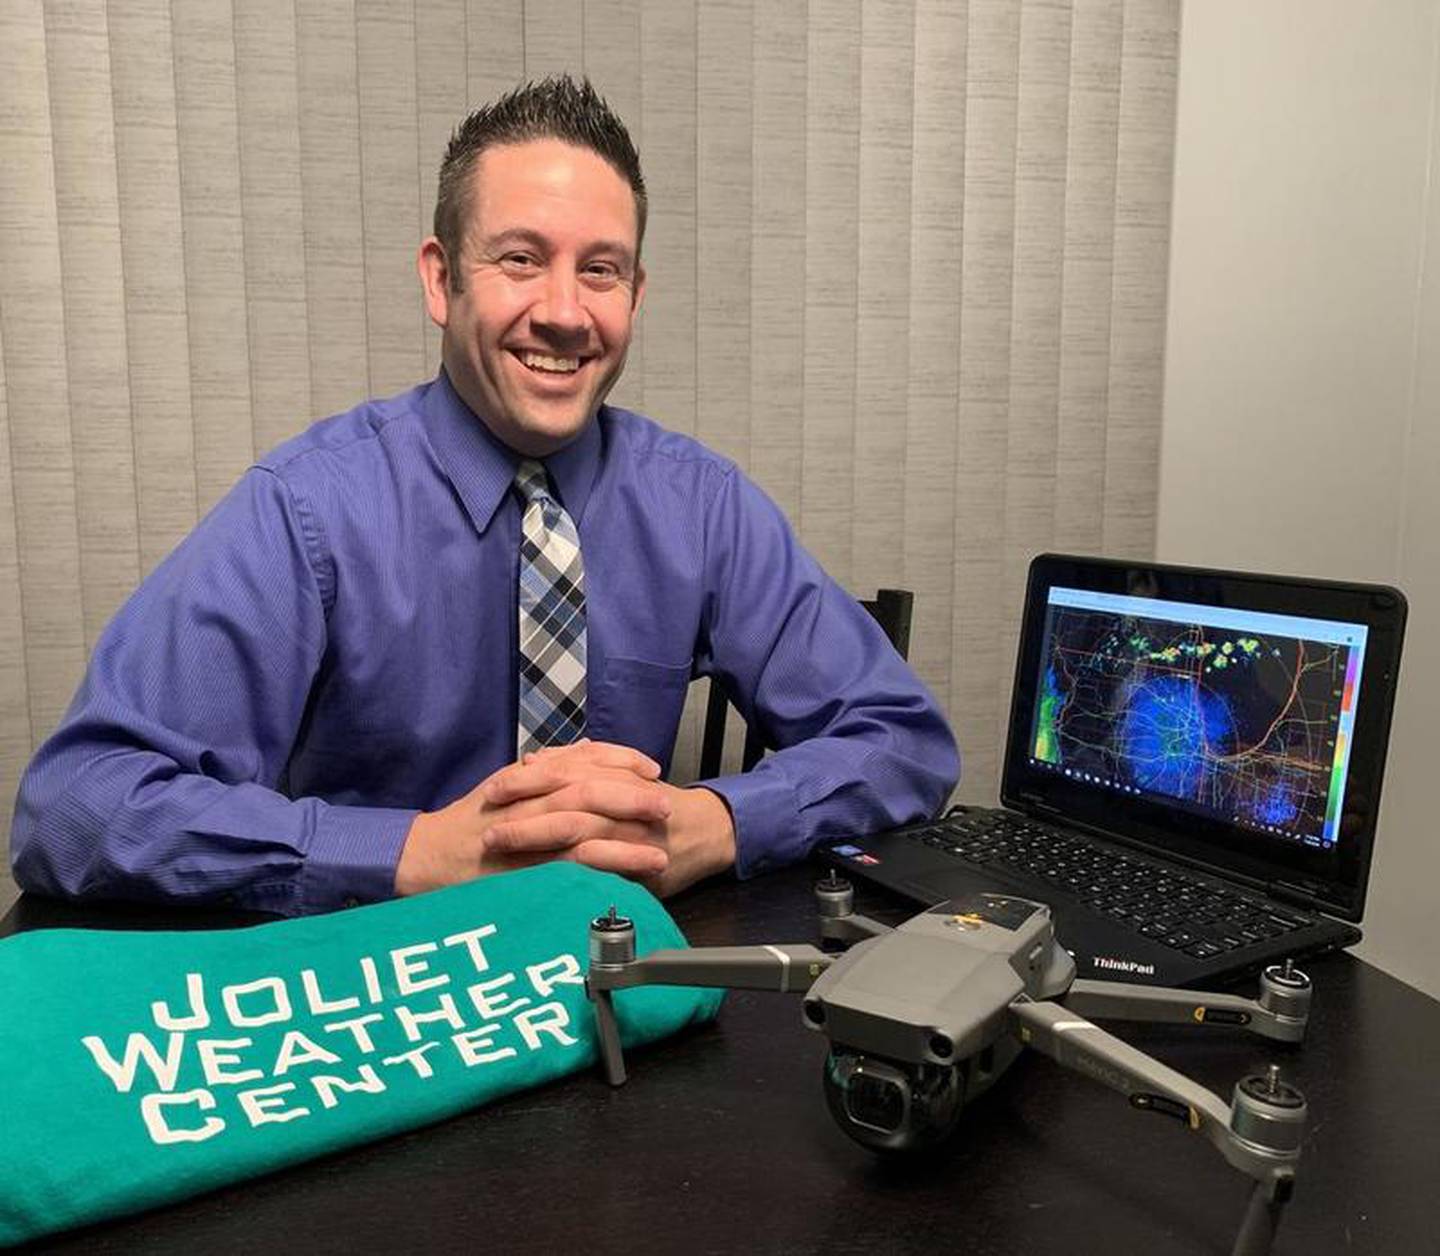 Jeremy Hylka, founder of the Joliet Weather Center, poses with the DJI Mavic Pro weather drone and computer software used for everyday forecasting.